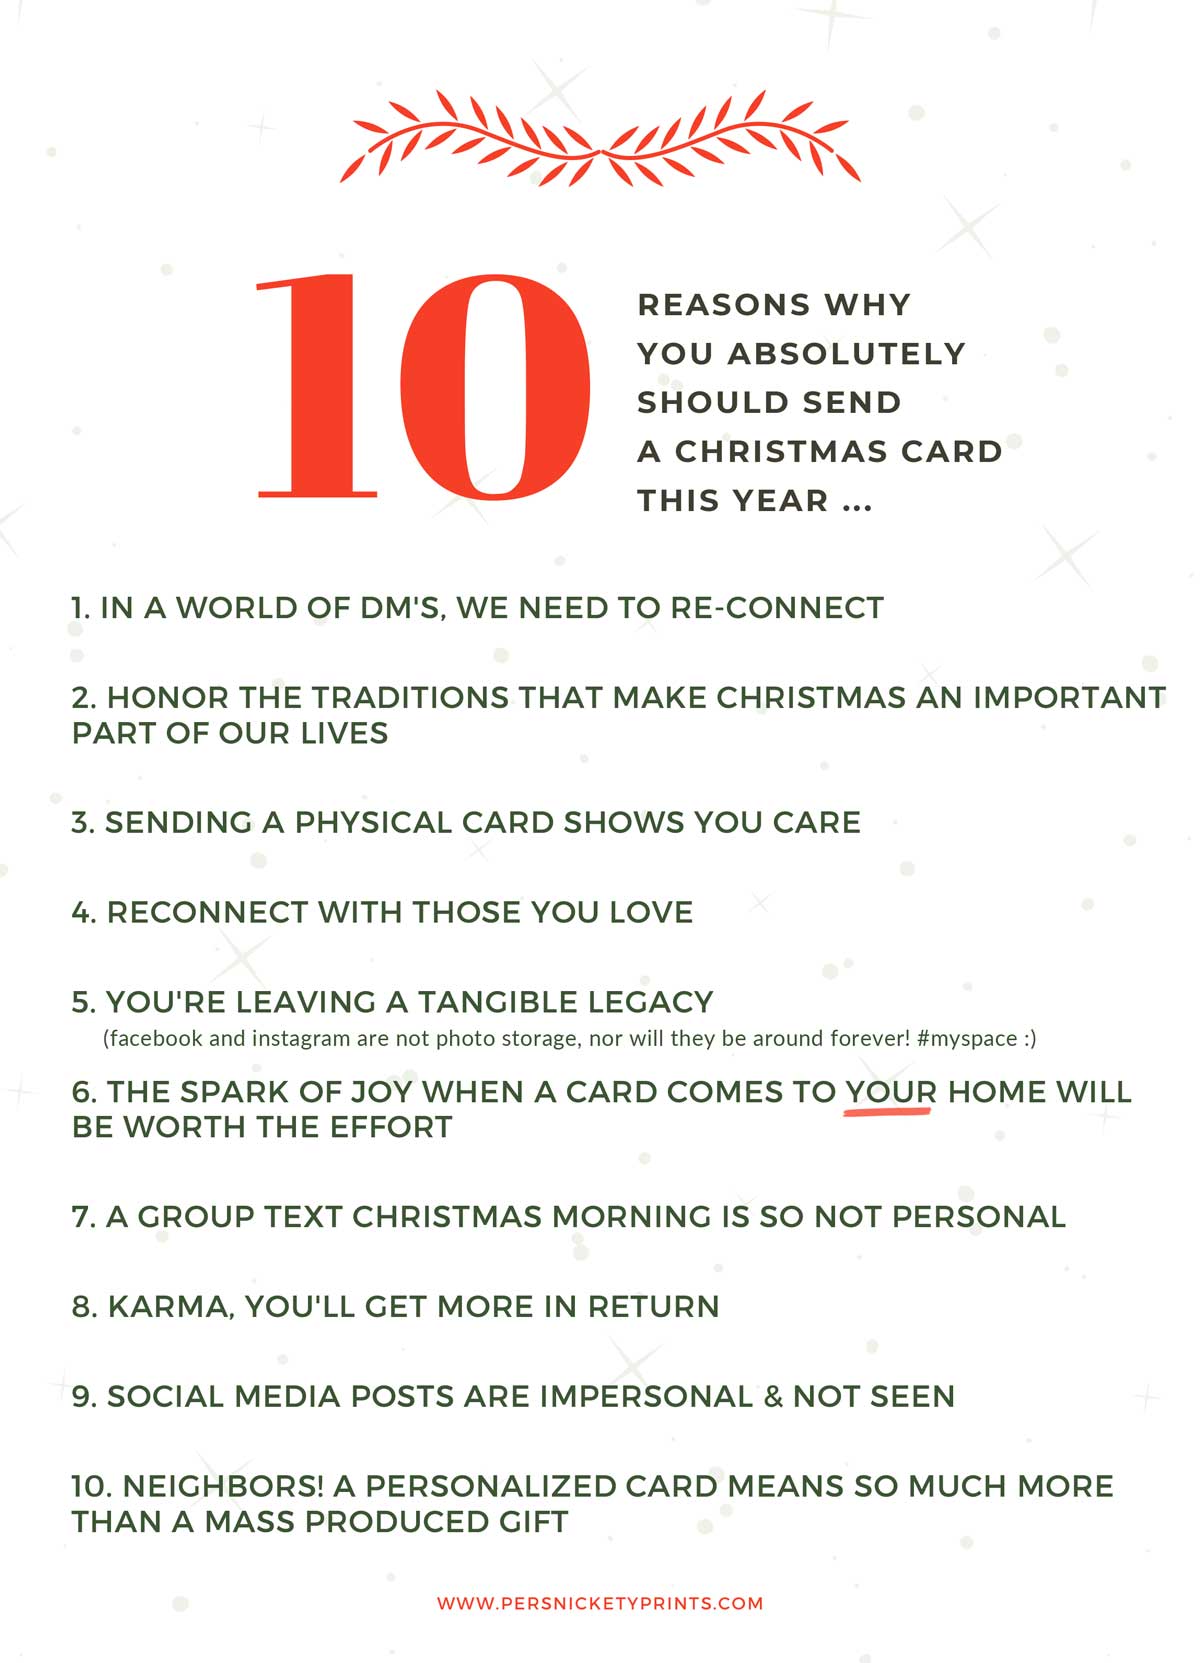 why you should send a christmas card